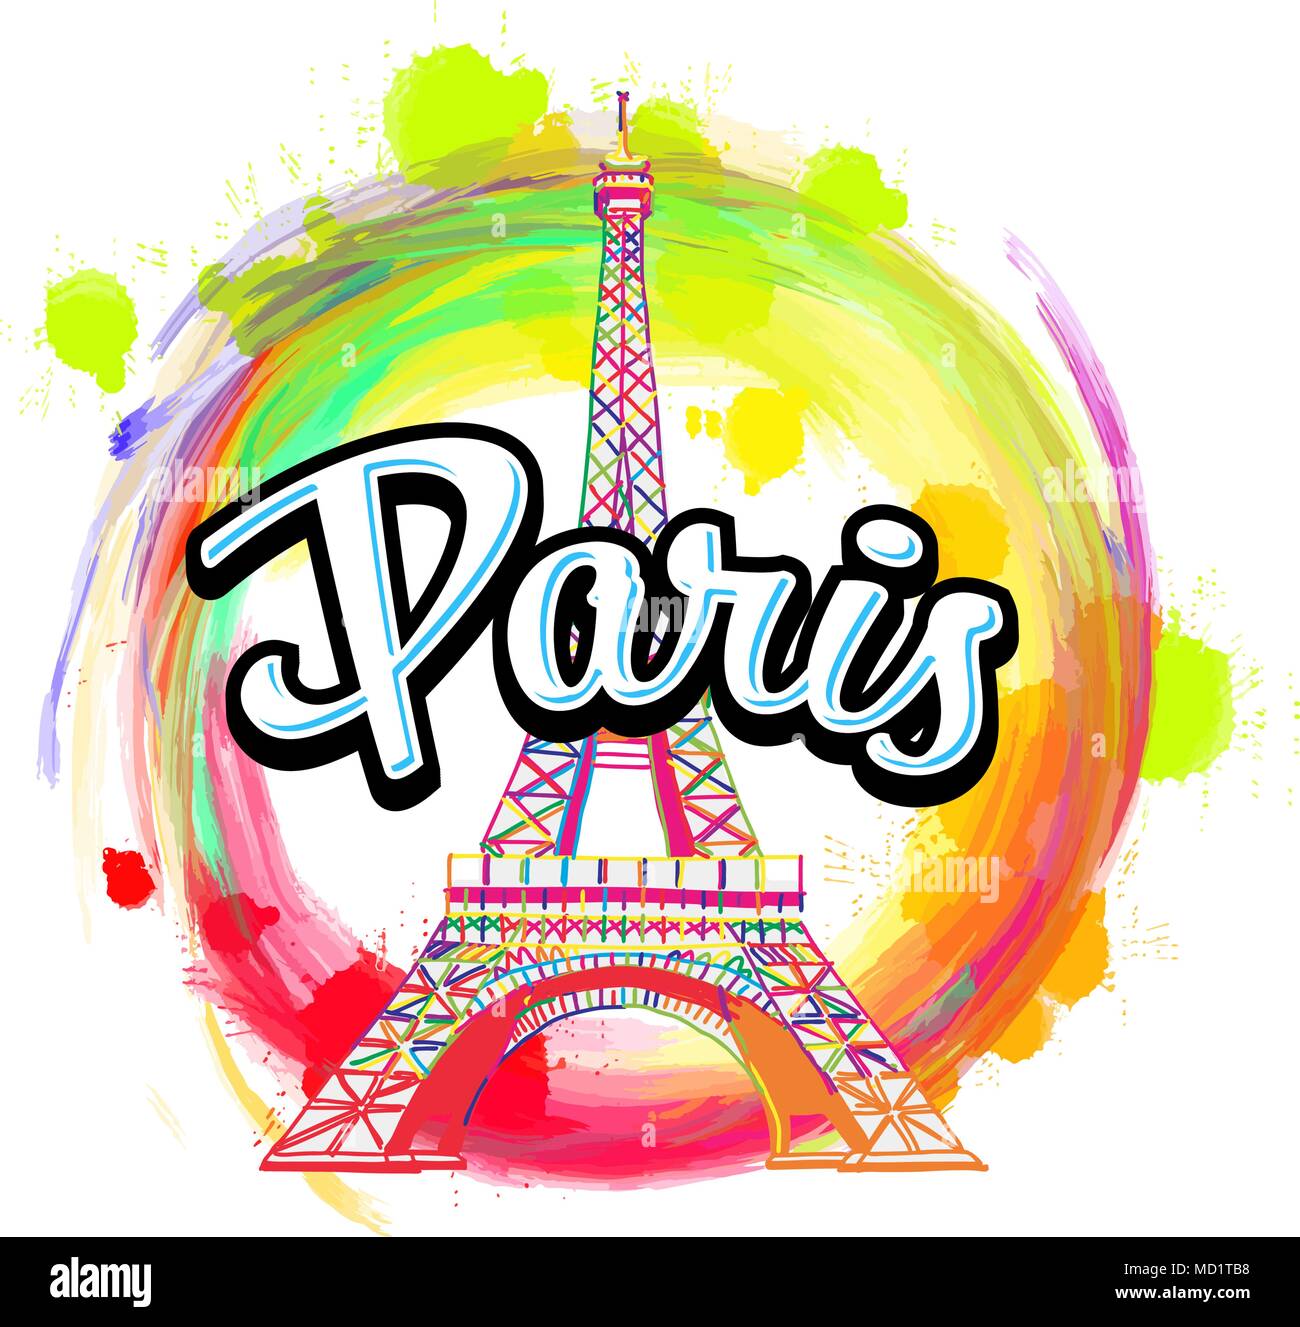 Paris Eiffel Tower Drawing with Headline. Hand drawn skyline illustration. Travel the world concept vector image for digital marketing and poster prin Stock Vector